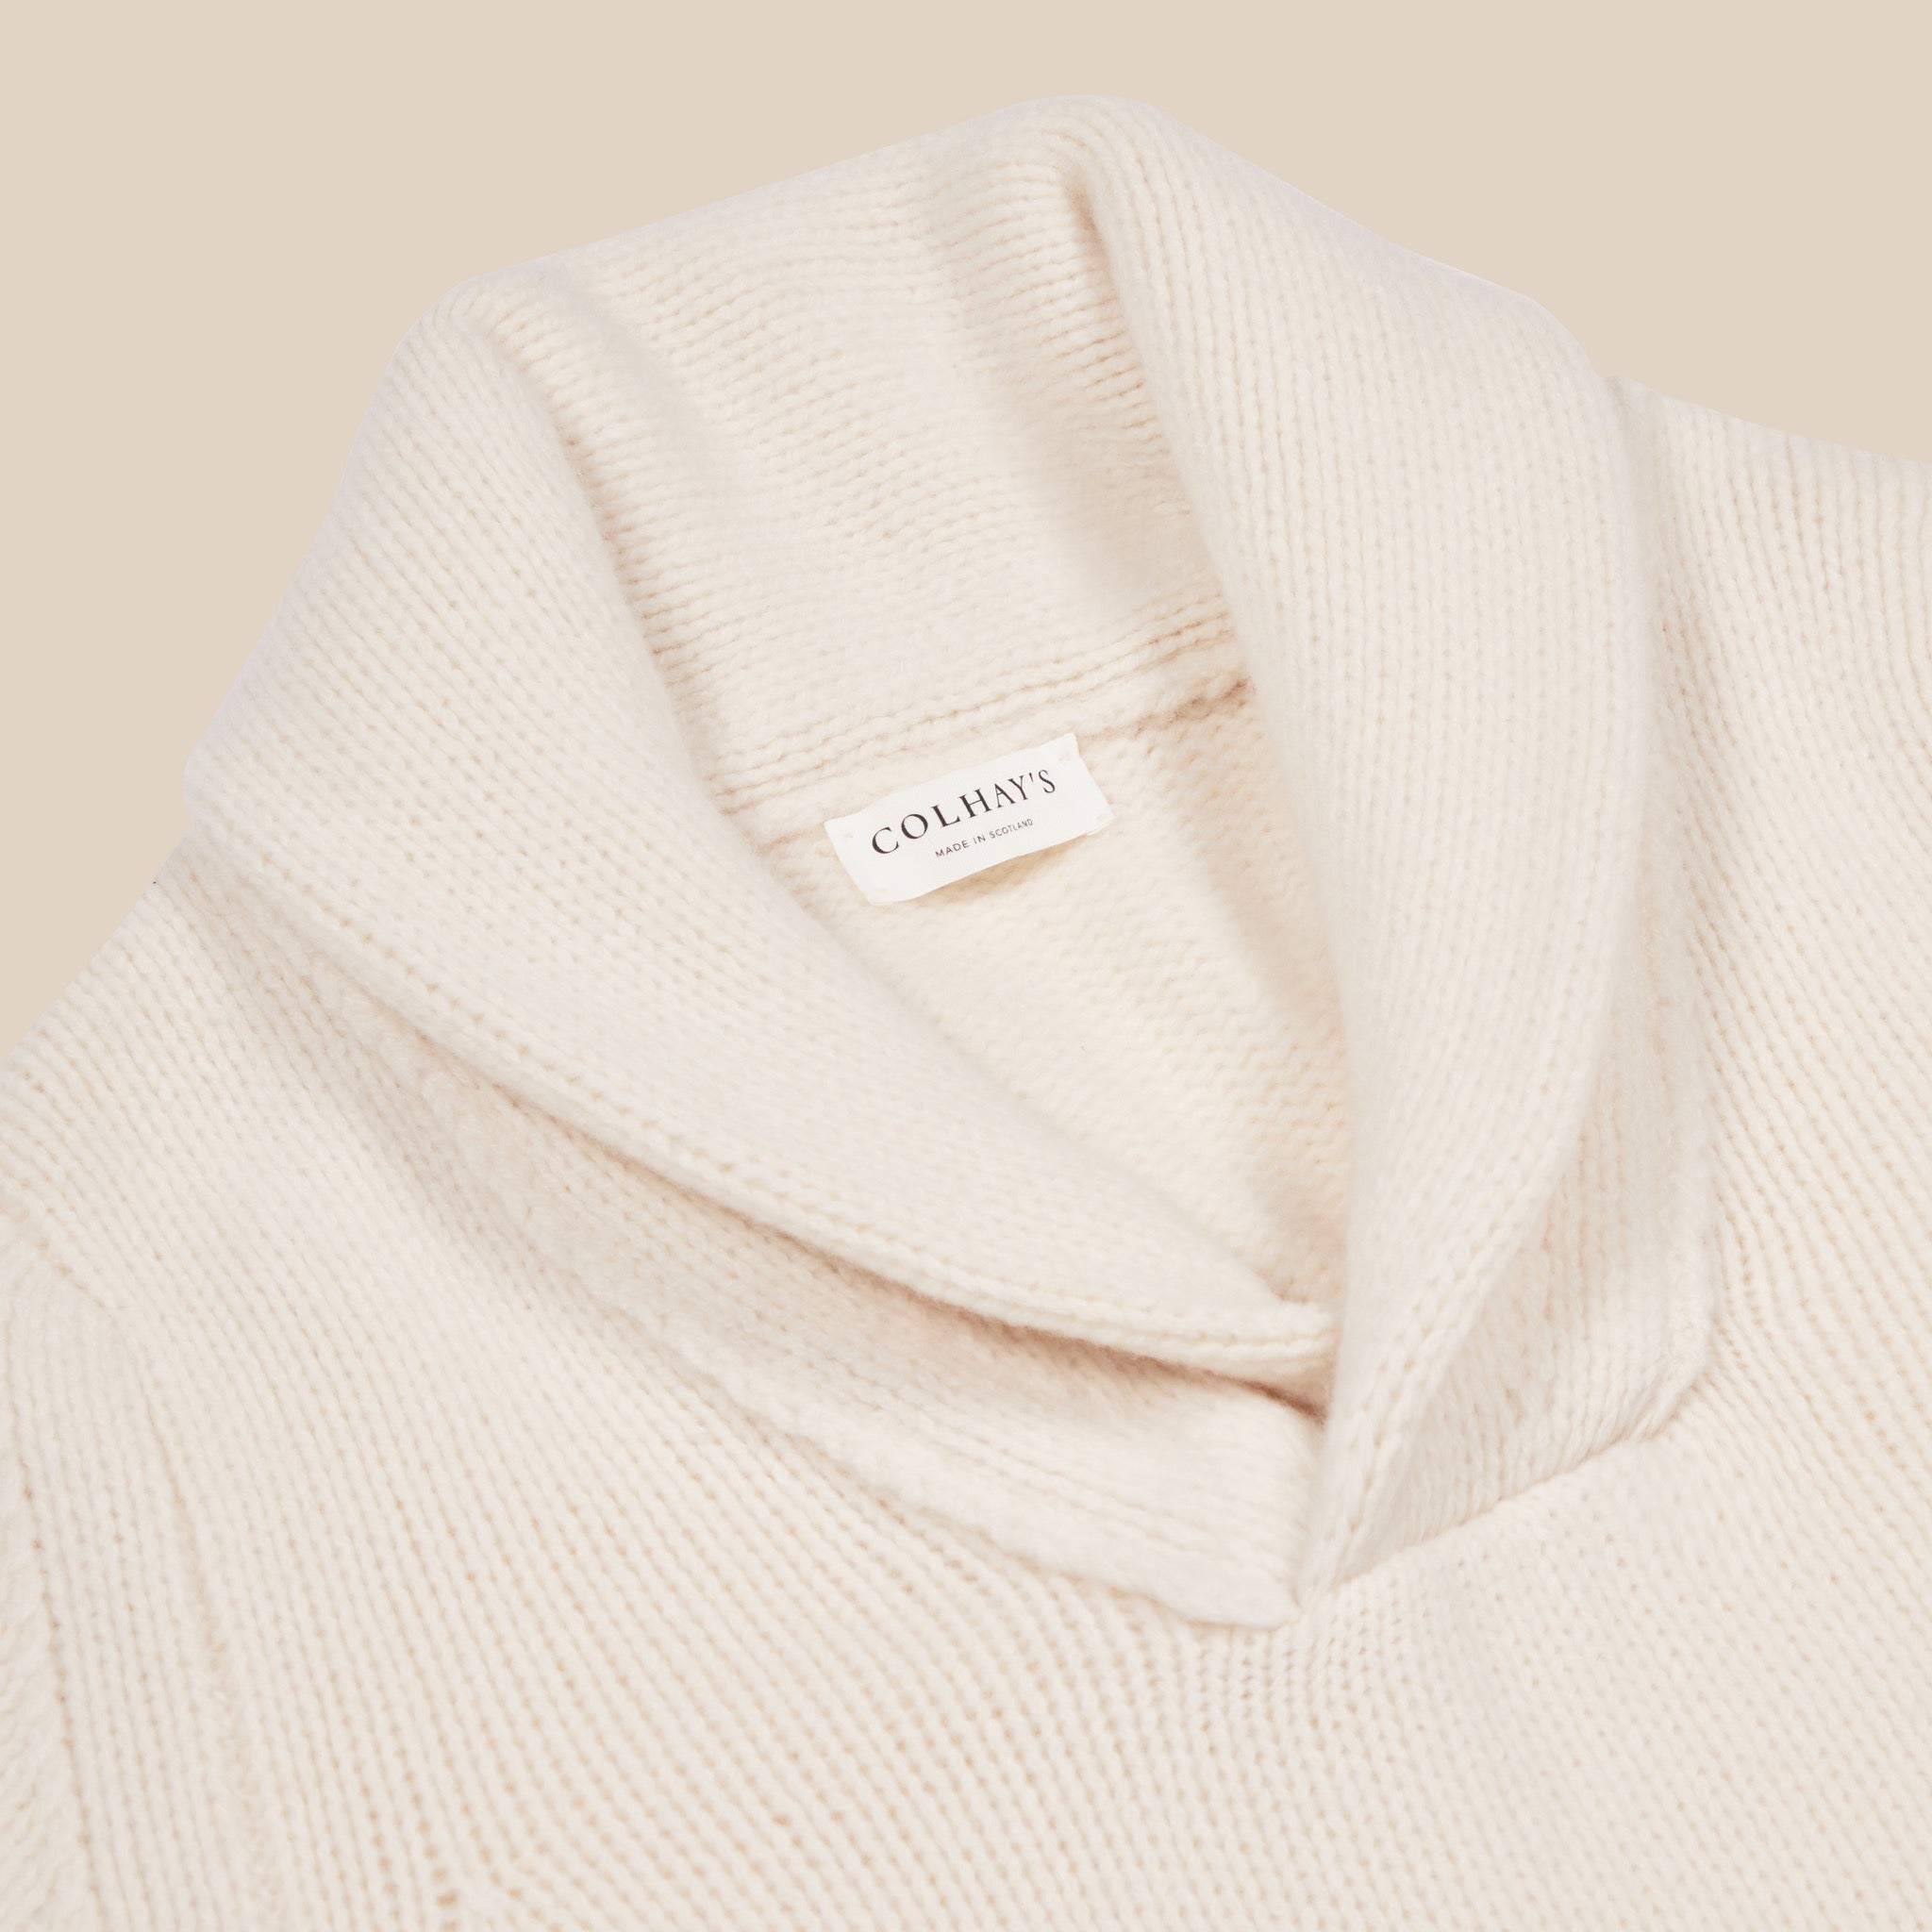 Superfine lambswool rugby shawl sweater in cream